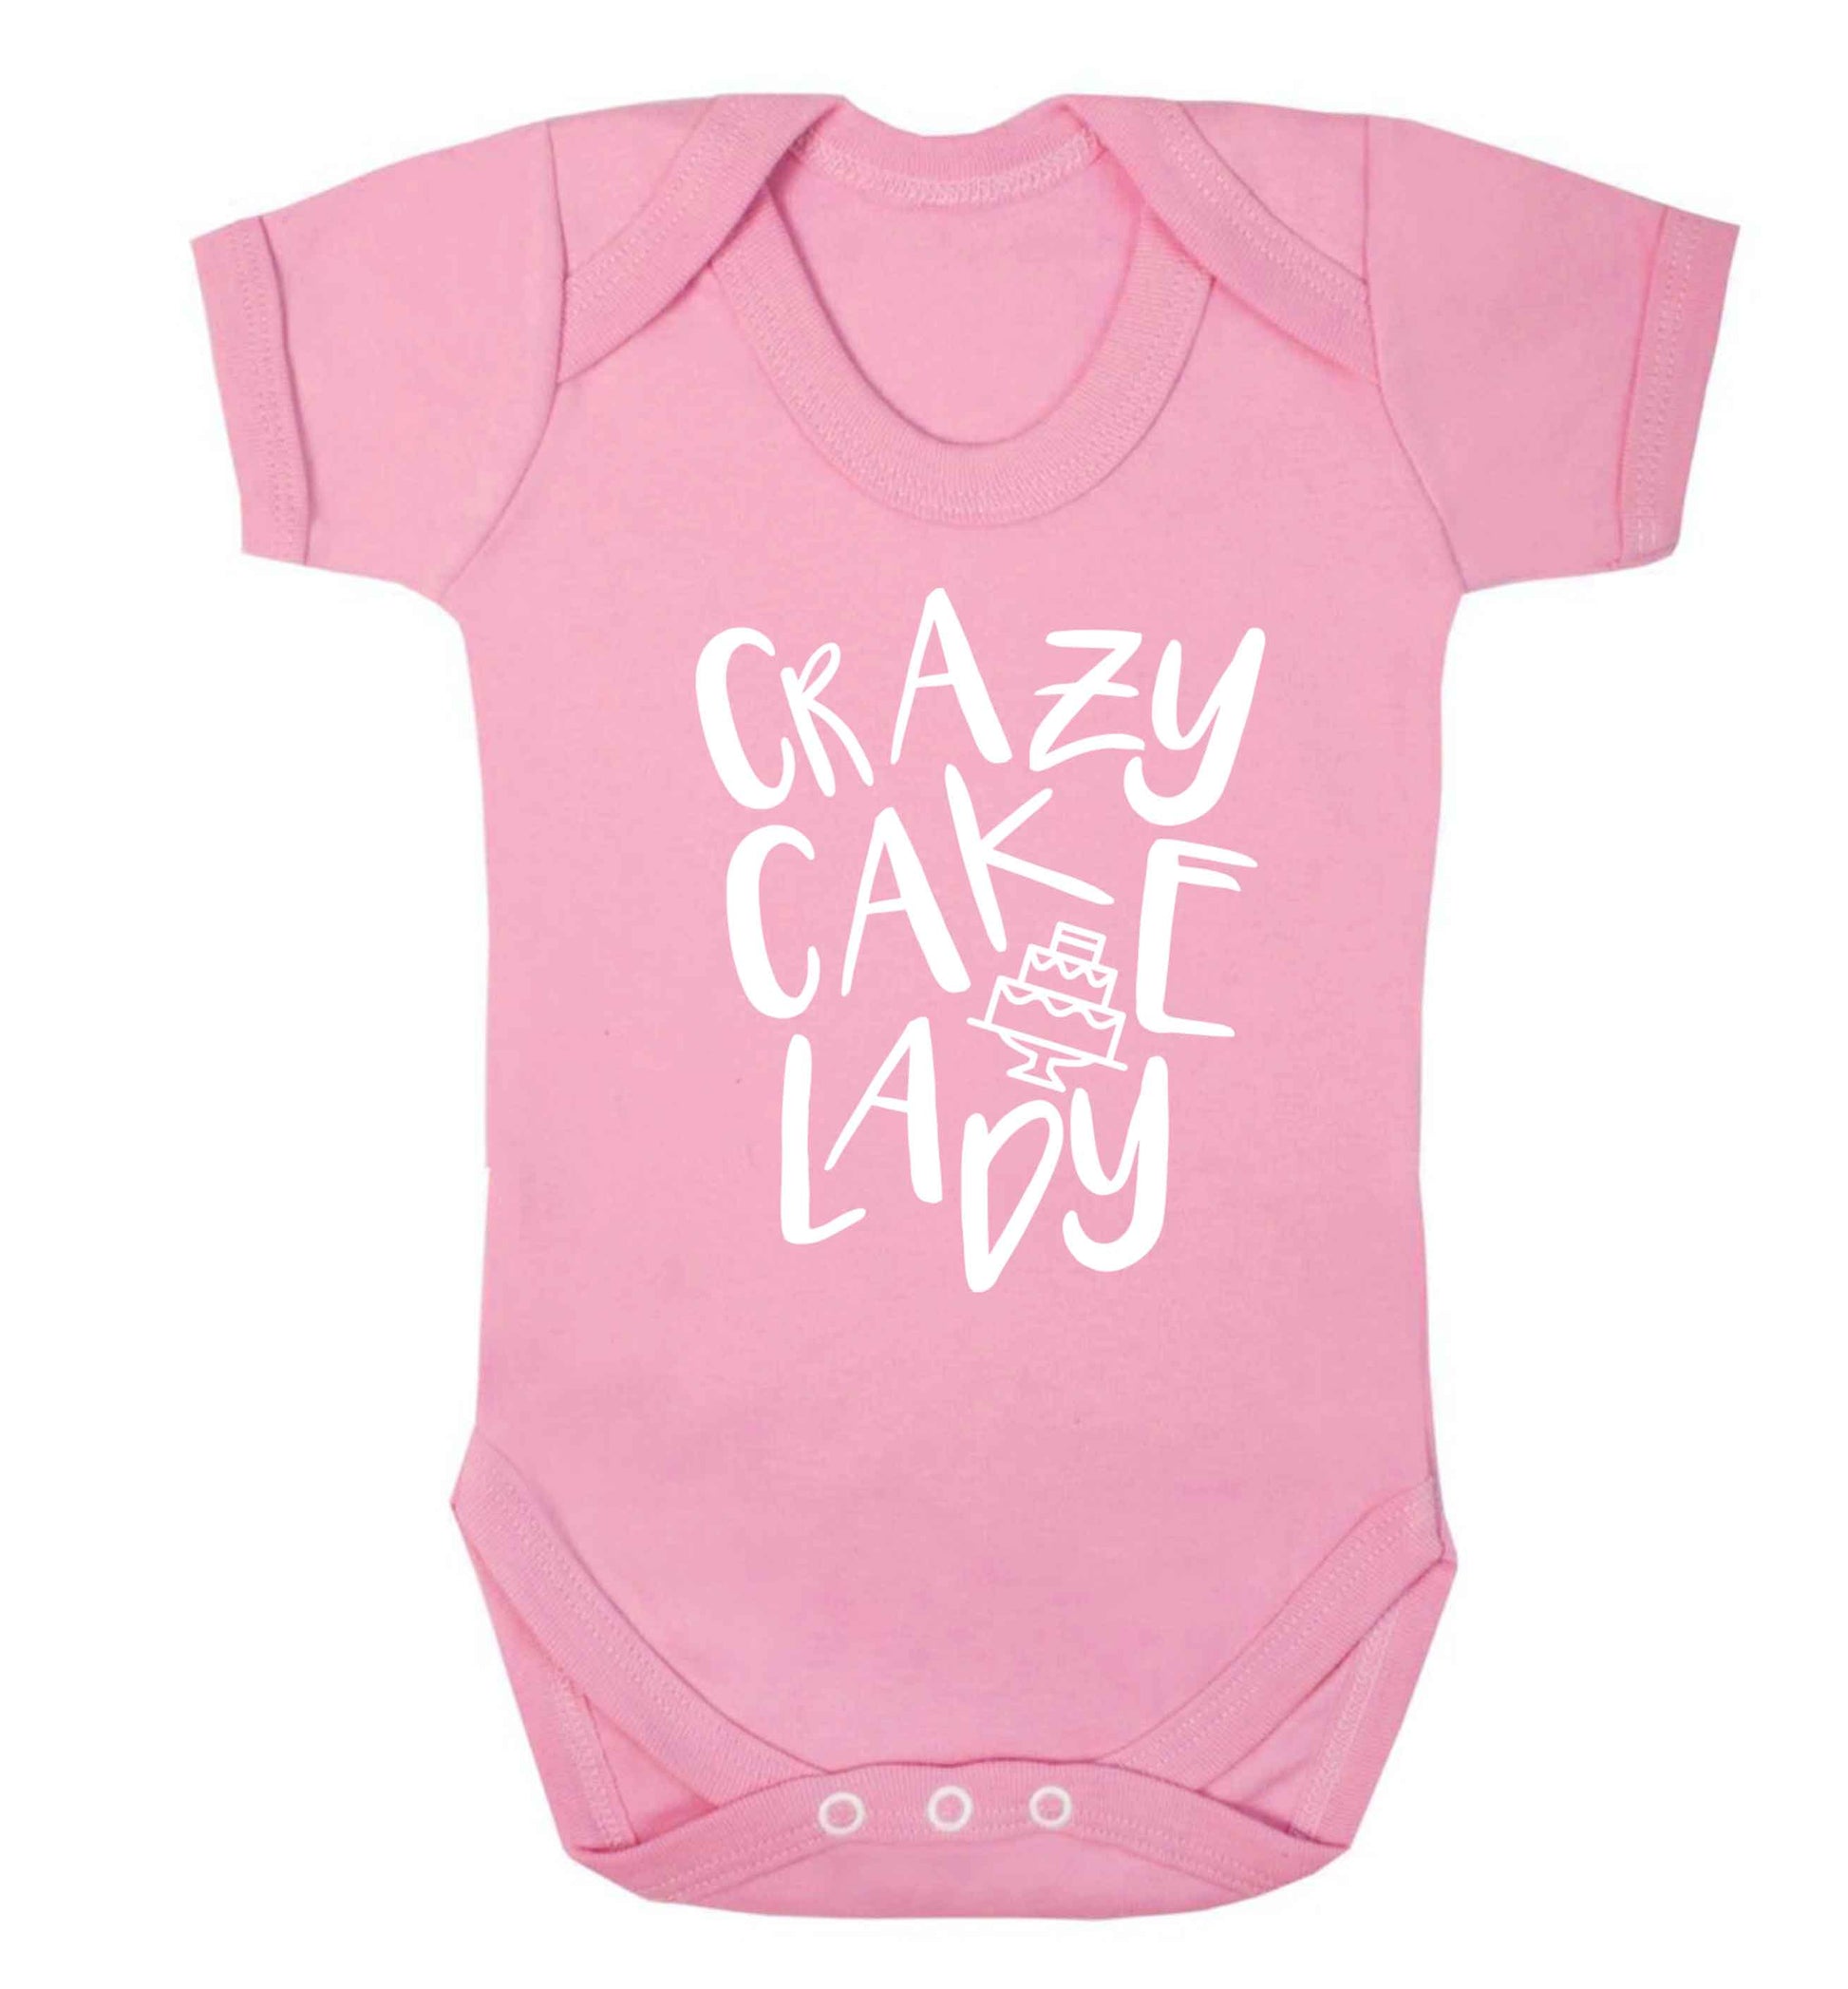 Crazy cake lady Baby Vest pale pink 18-24 months